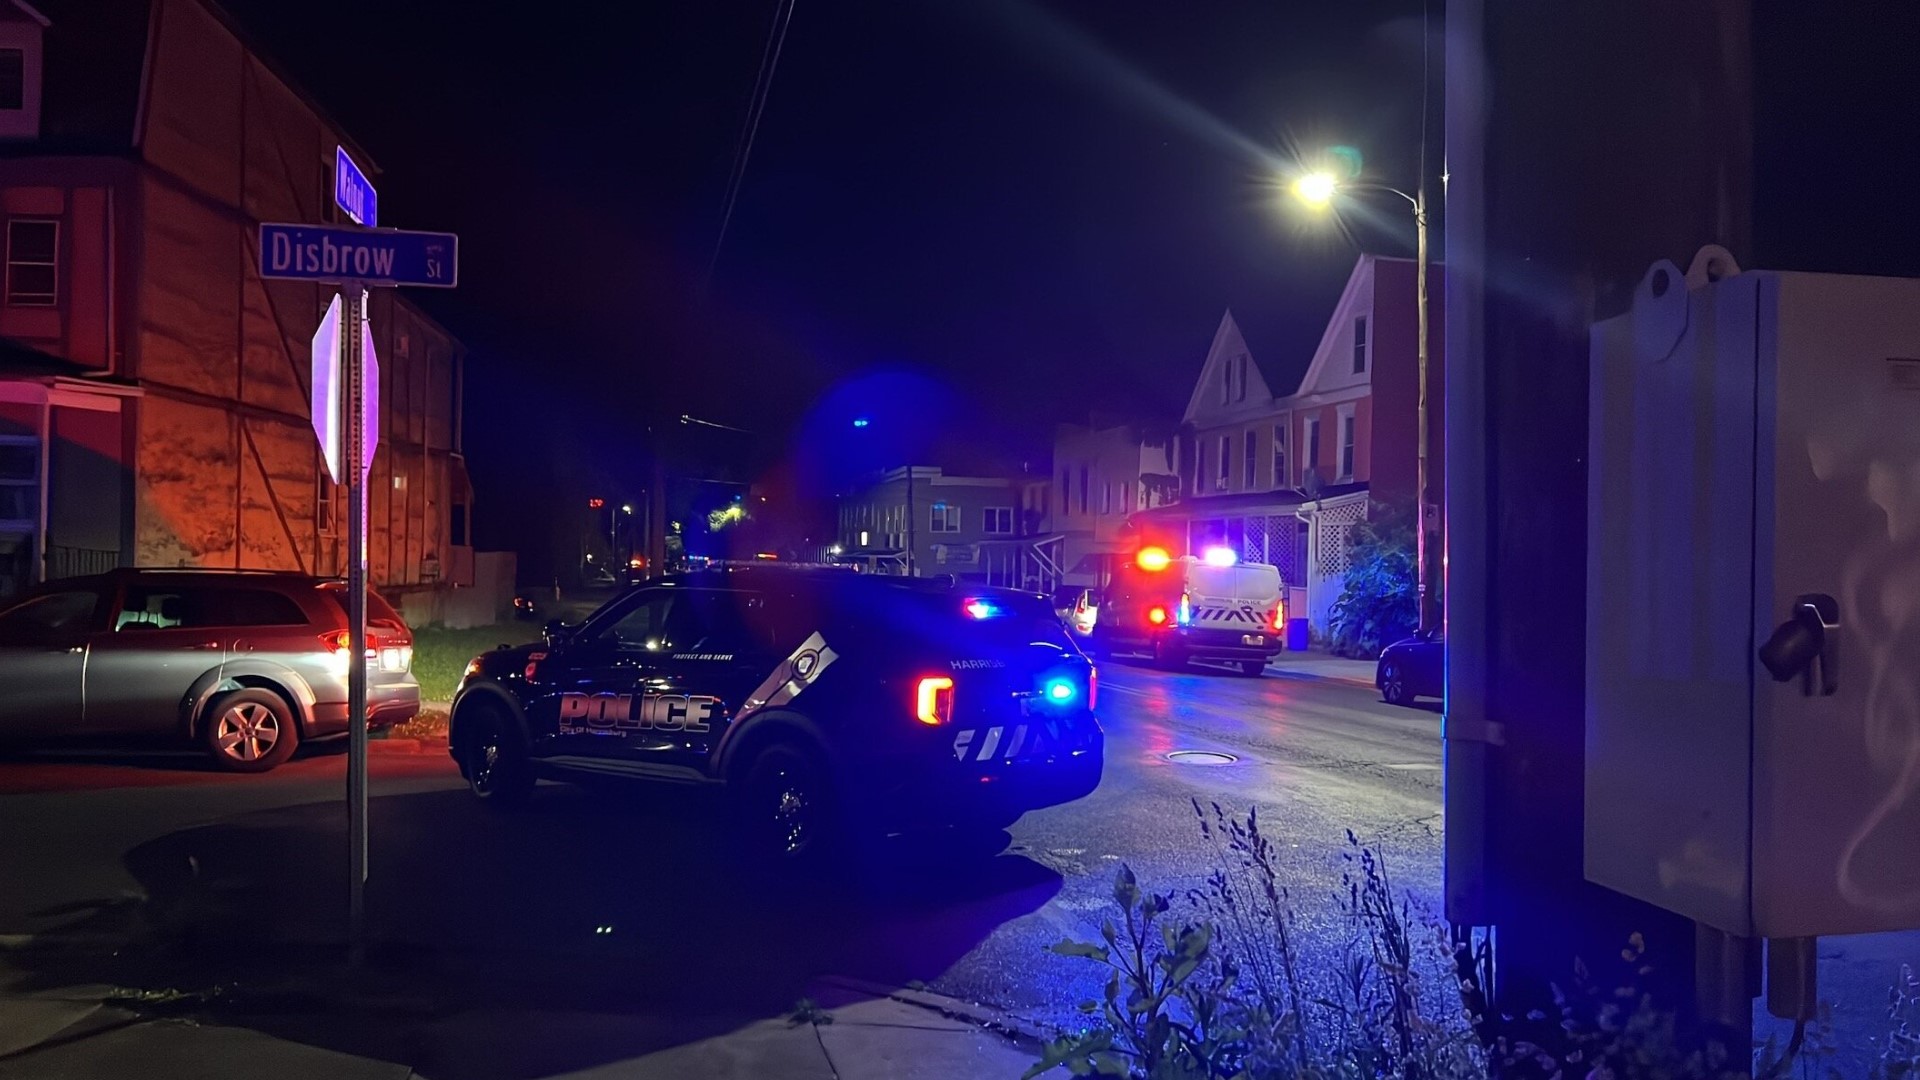 A Harrisburg shooting drew police to Disbrow Street early Friday morning. One person is in surgery with life-threatening injuries.